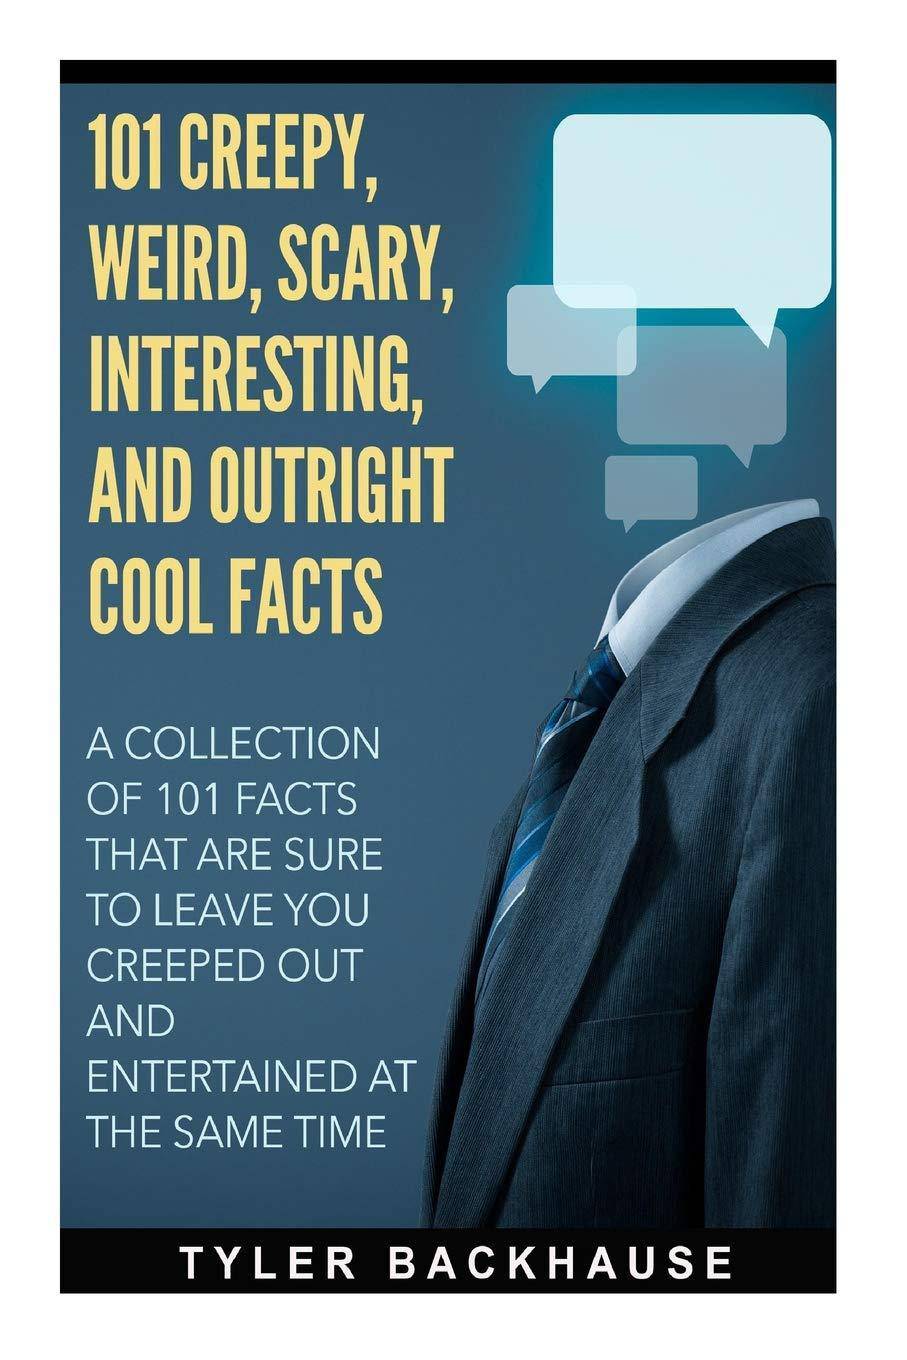 101 Creepy, Weird, Scary, Interesting, and Outright Cool Facts: - SureShot Books Publishing LLC